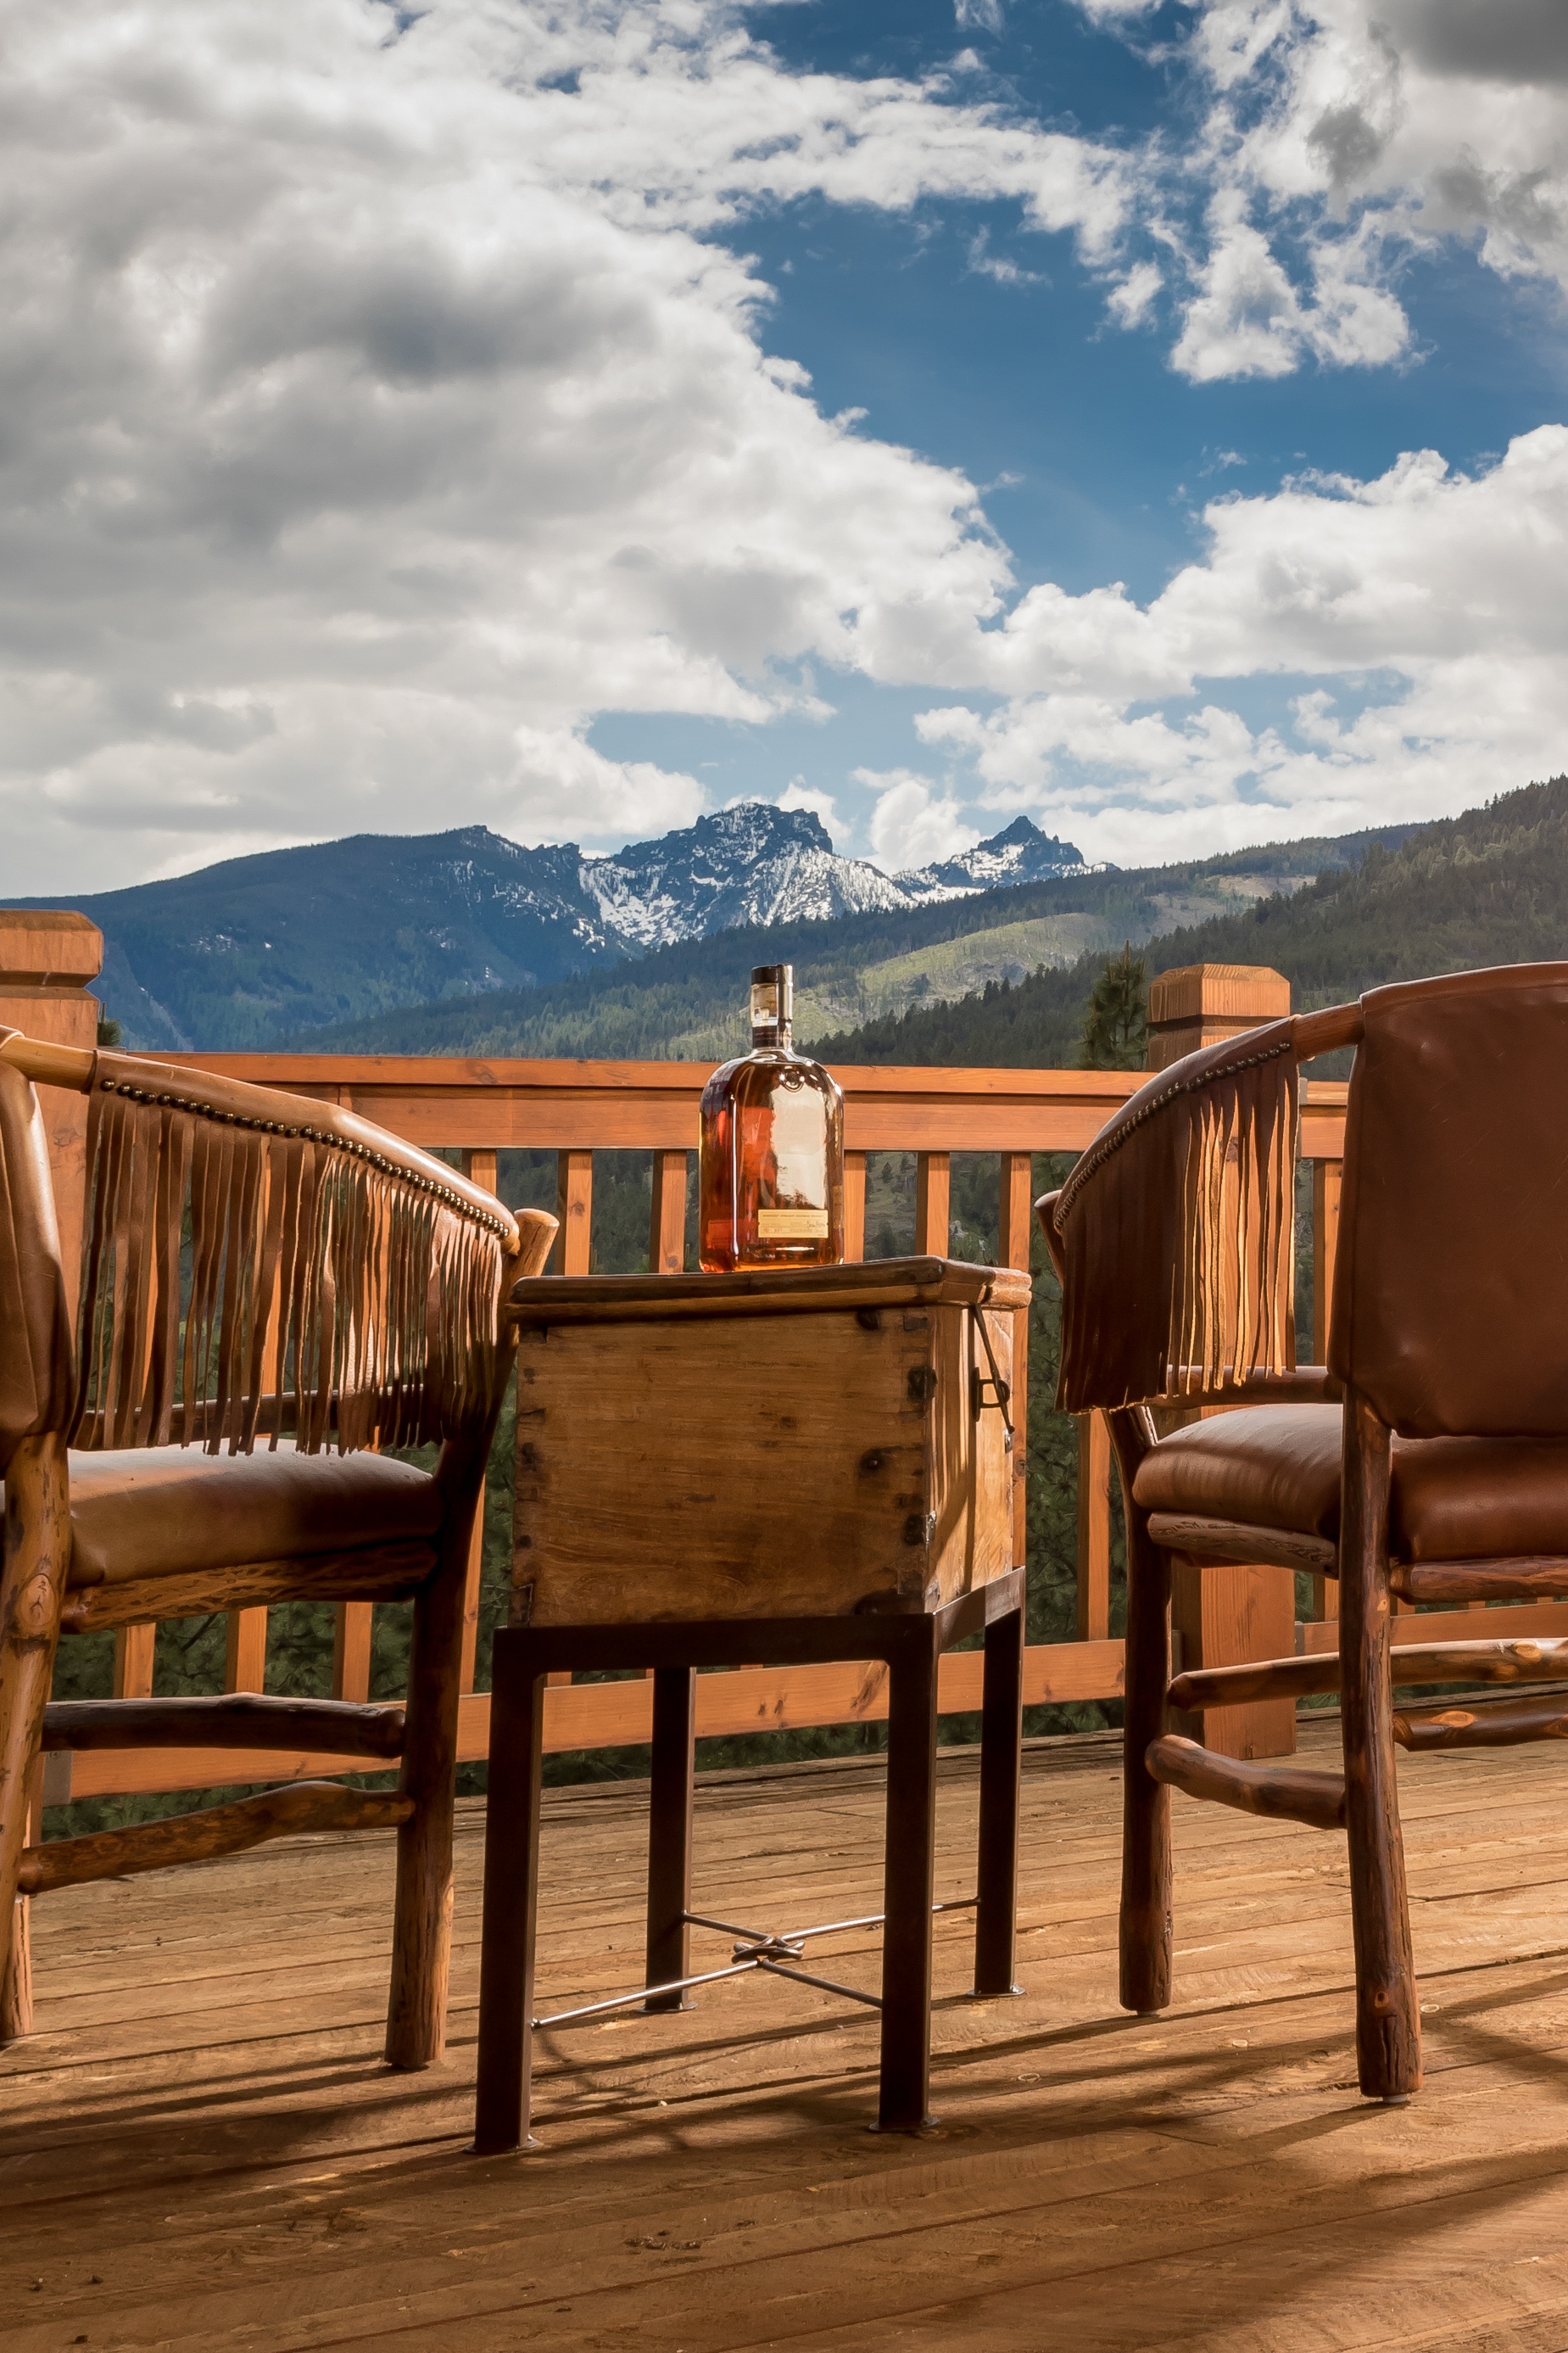 Bitterroot Valley Luxury Estate Offers Mountain Views, Sustainable Living, Tranquil Retreat, Big Sky Outdoor Lifestyle … and the Opportunity to Name Your Price